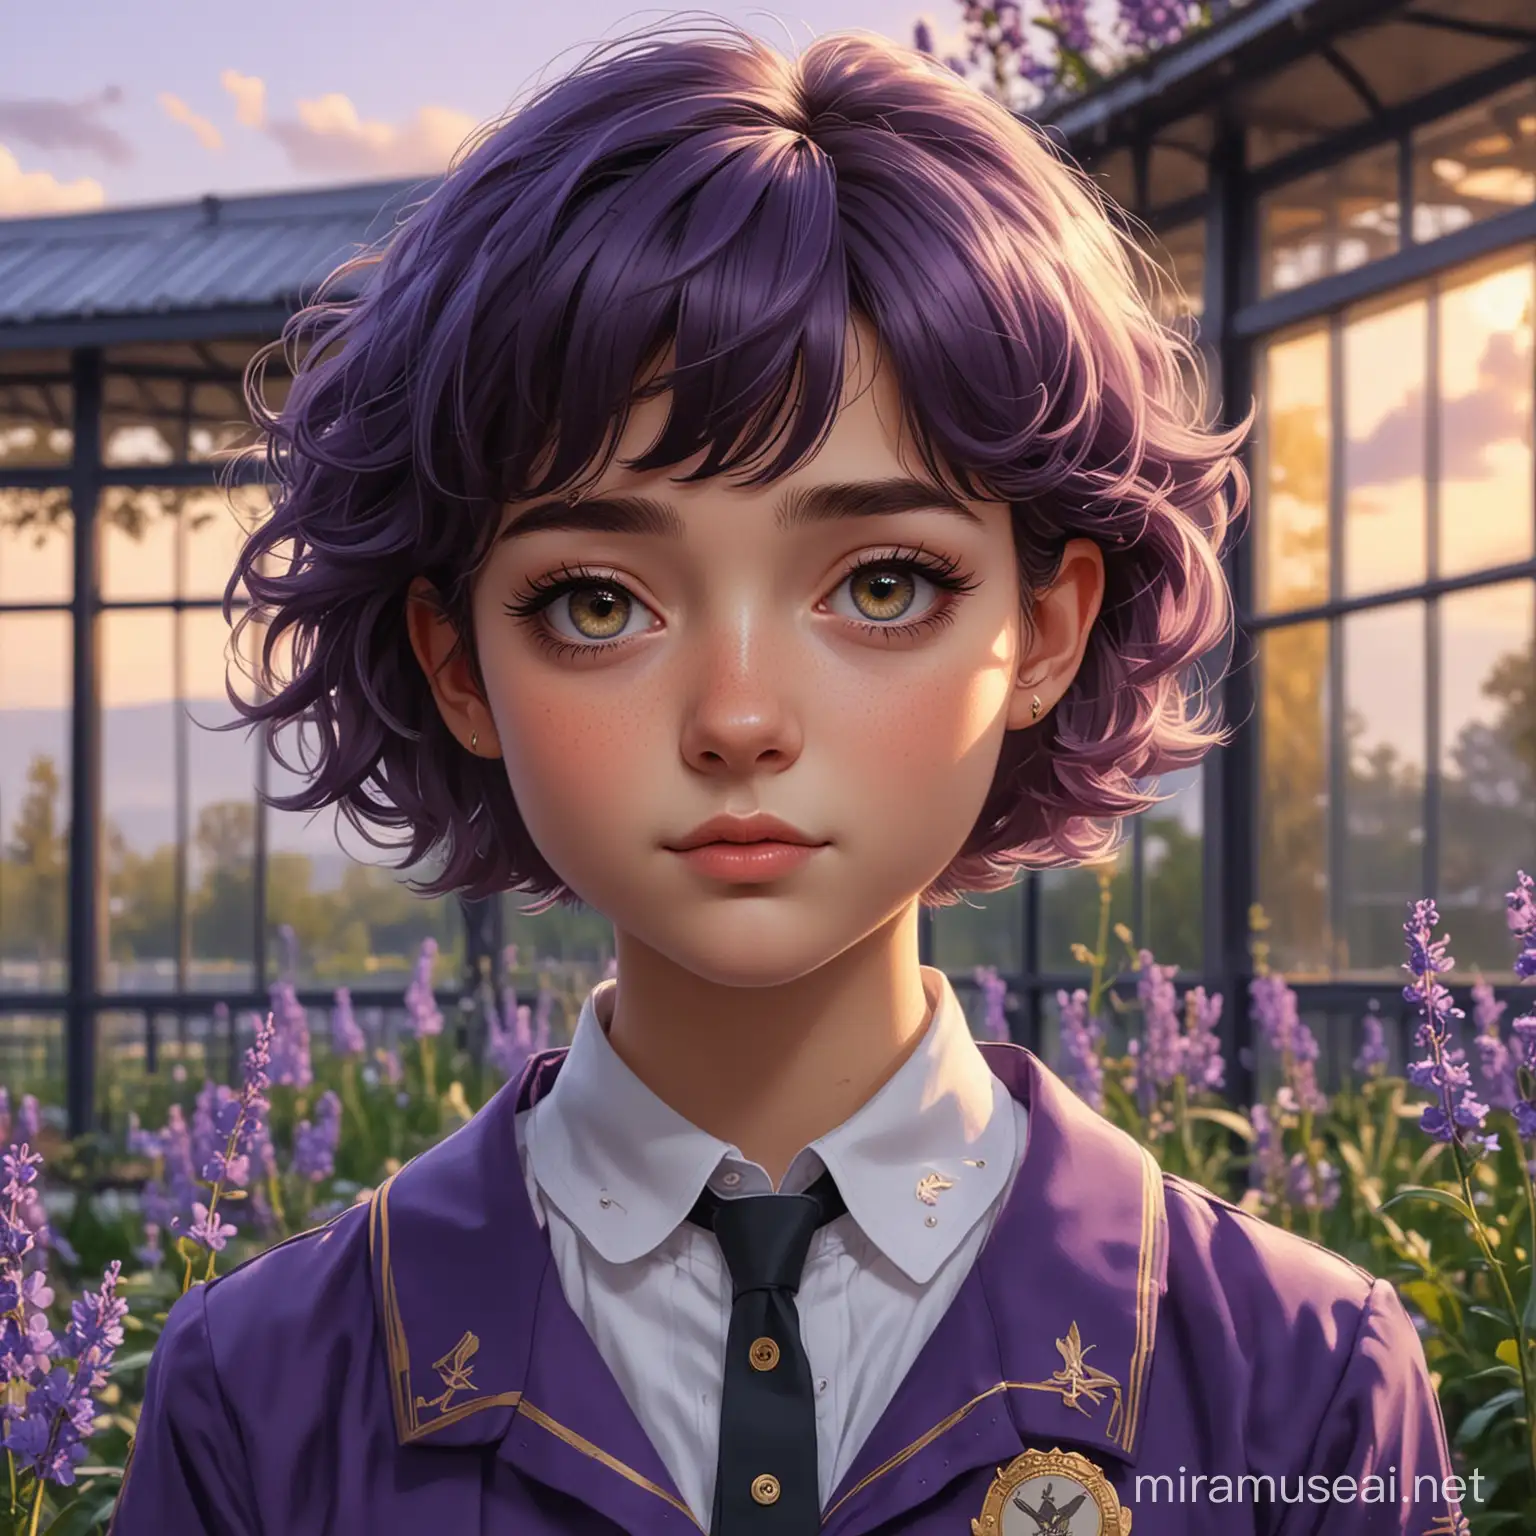 Shy Reader in Lavender School Uniform with Expressive Eyes in Glass Pavilion at Dawn